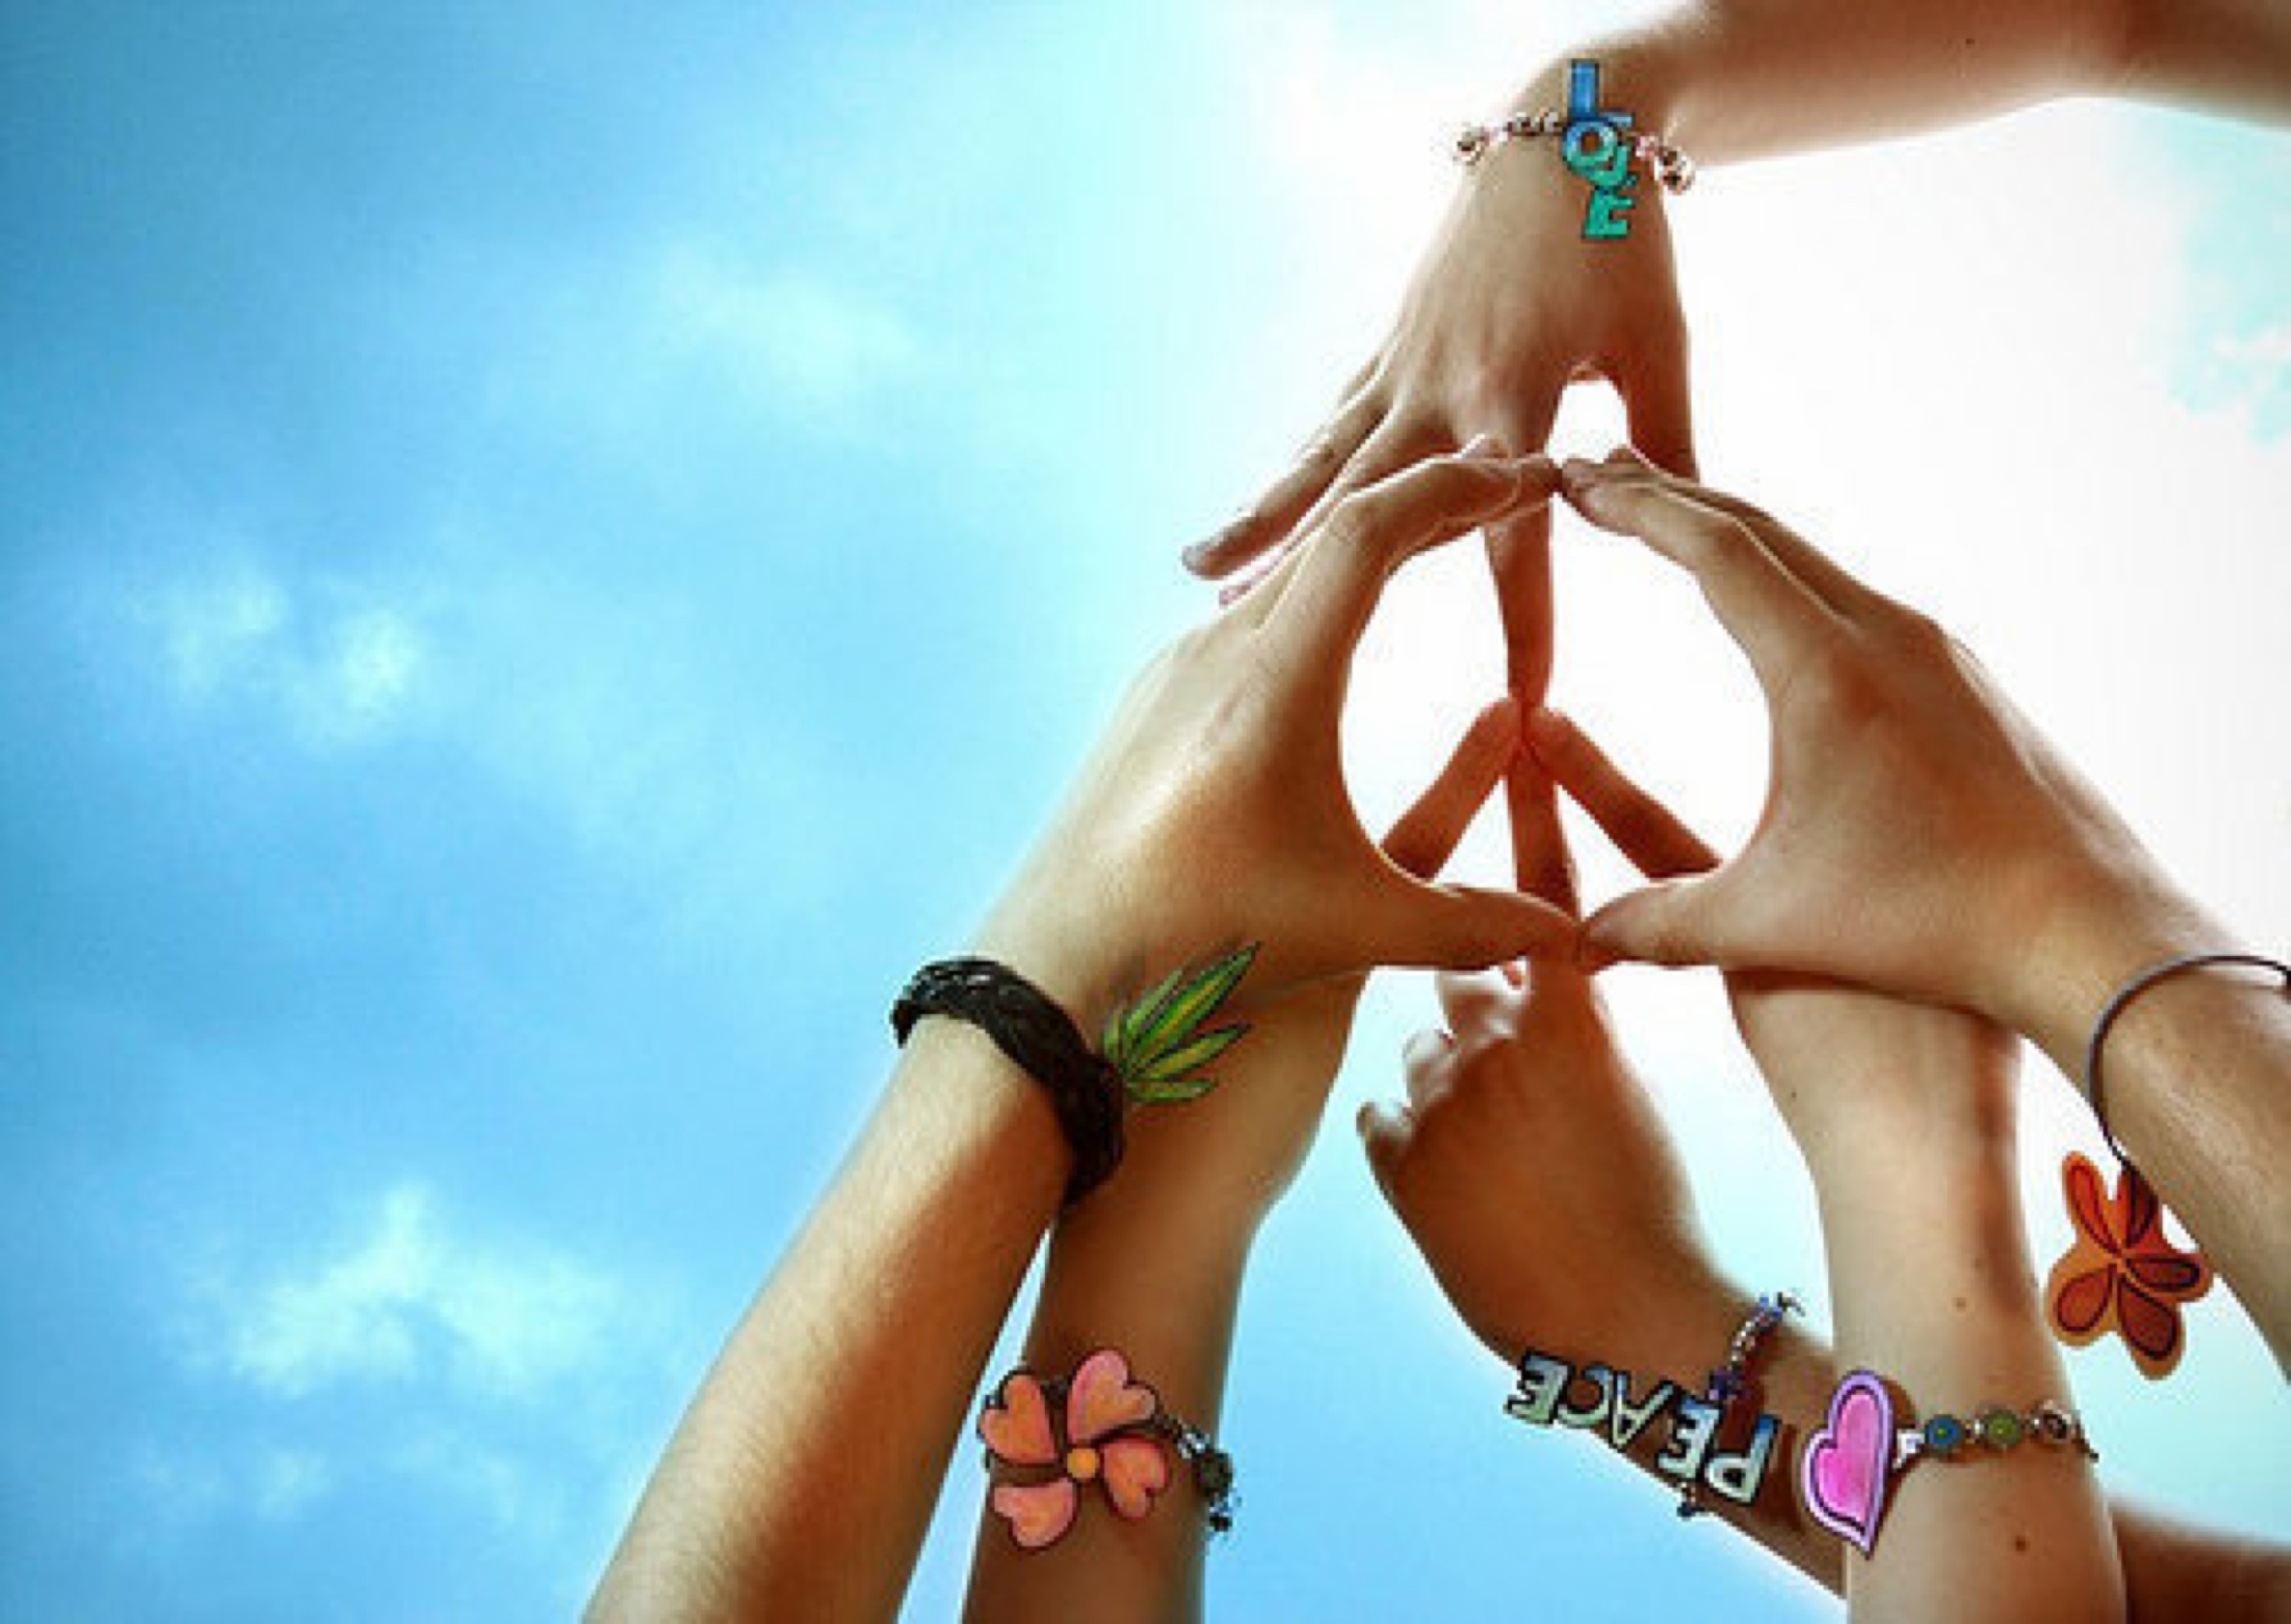 Peace And Love - 2370x1680 Wallpaper 